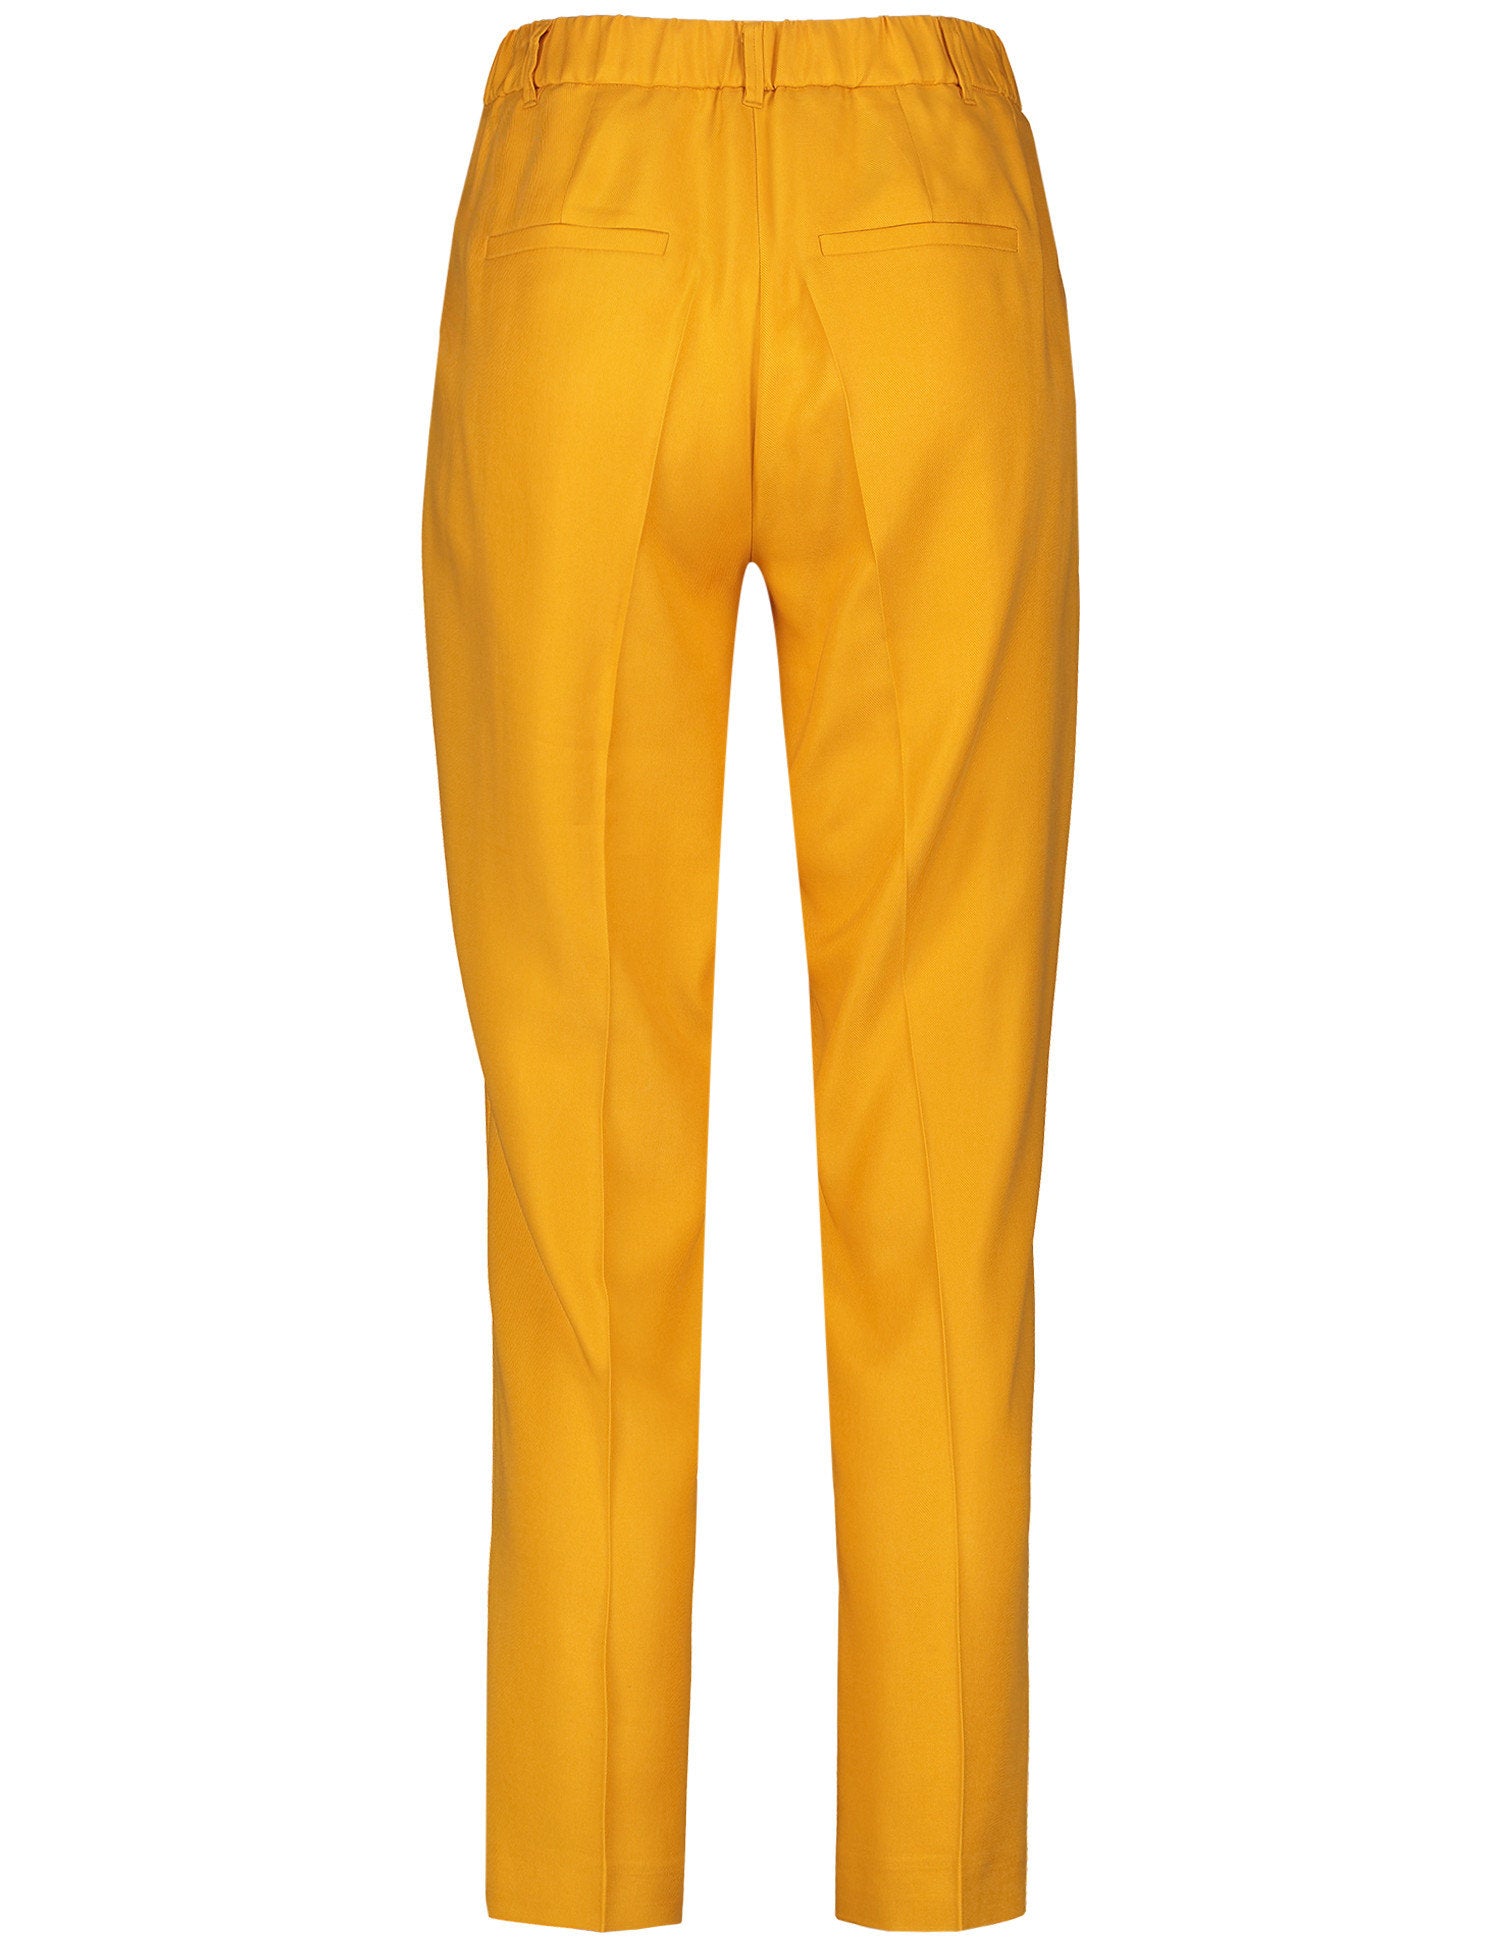 7/8 Length Trousers With An Elasticated Waistband On The Back_220006-31211_40216_02